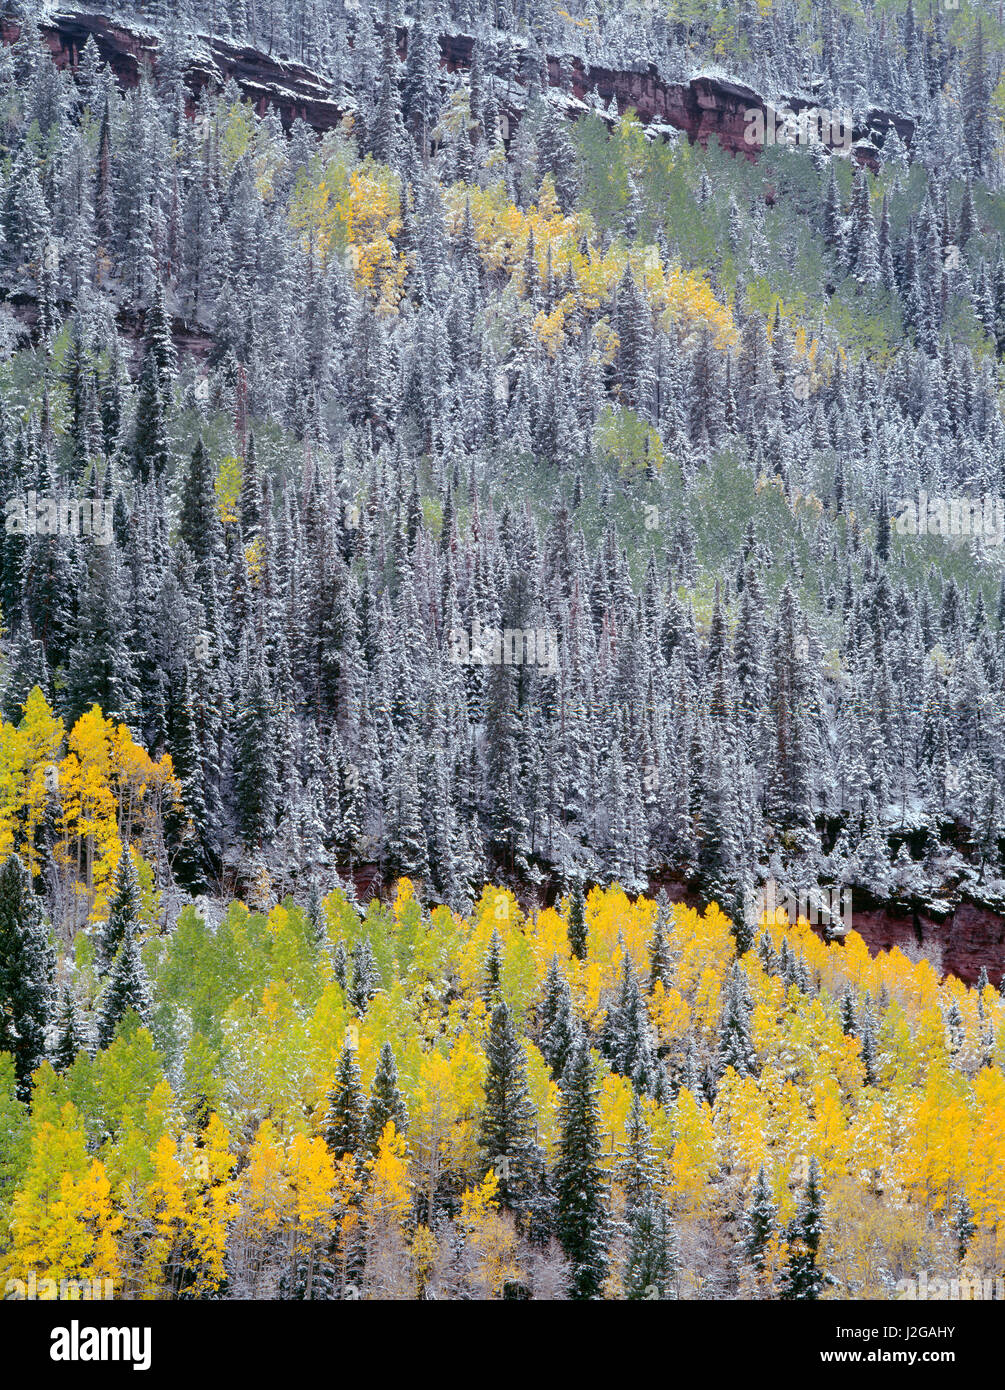 USA, Colorado, Uncompahgre National Forest, Fall snowstorm blankets aspen and conifers on slopes of Ballard Mountain. (Large format sizes available) Stock Photo